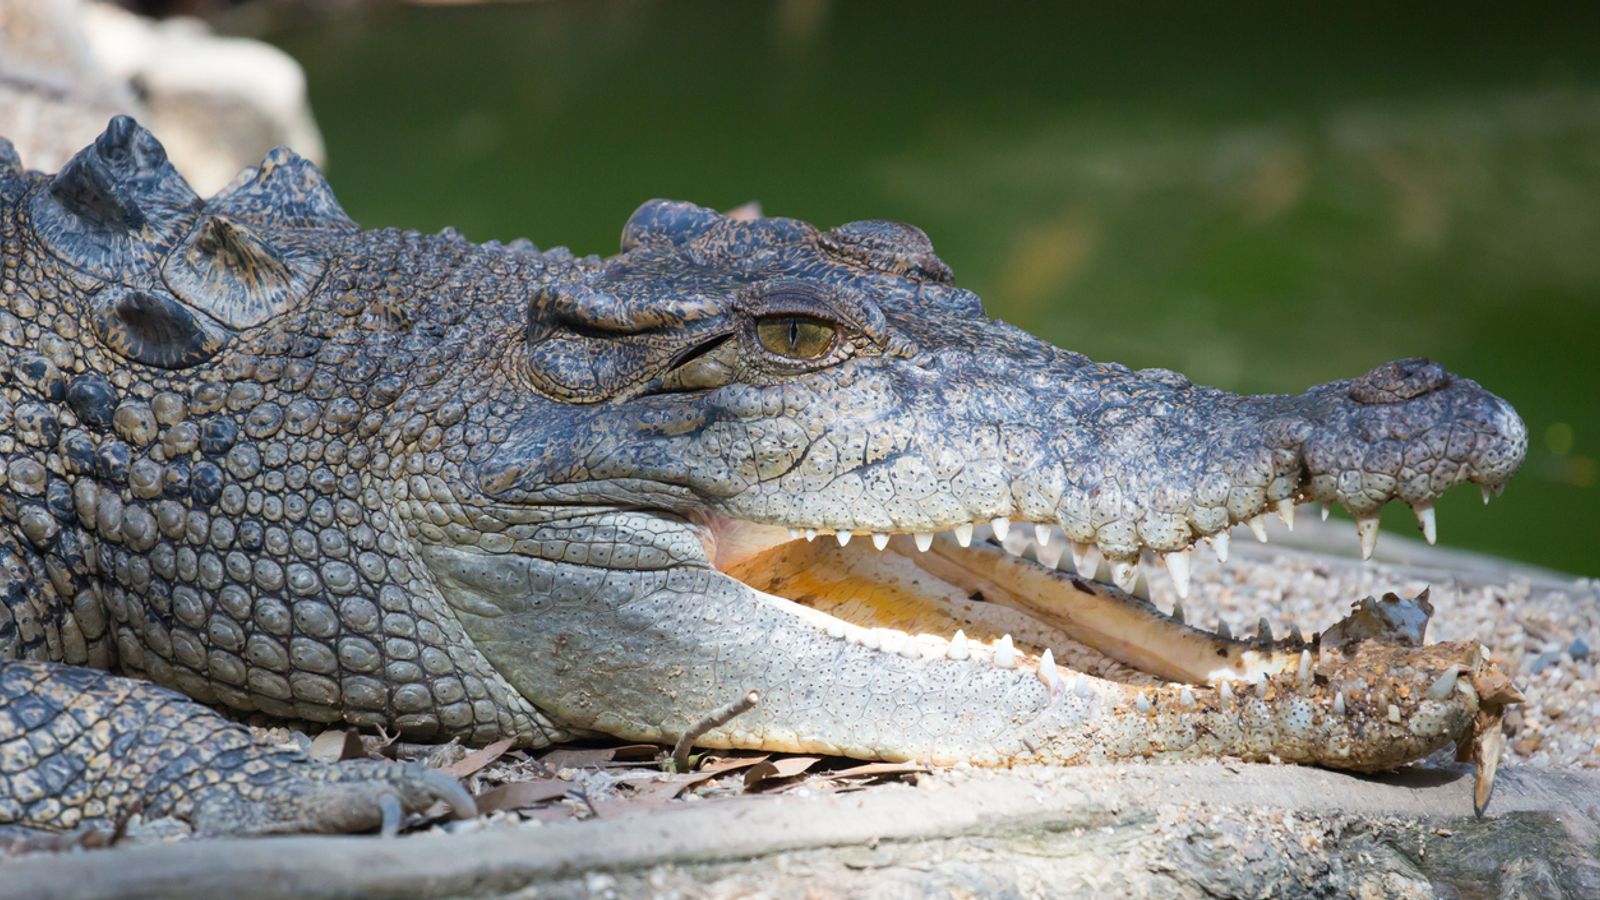 Human remains found inside two crocodiles after search for missing fisherman in Australia